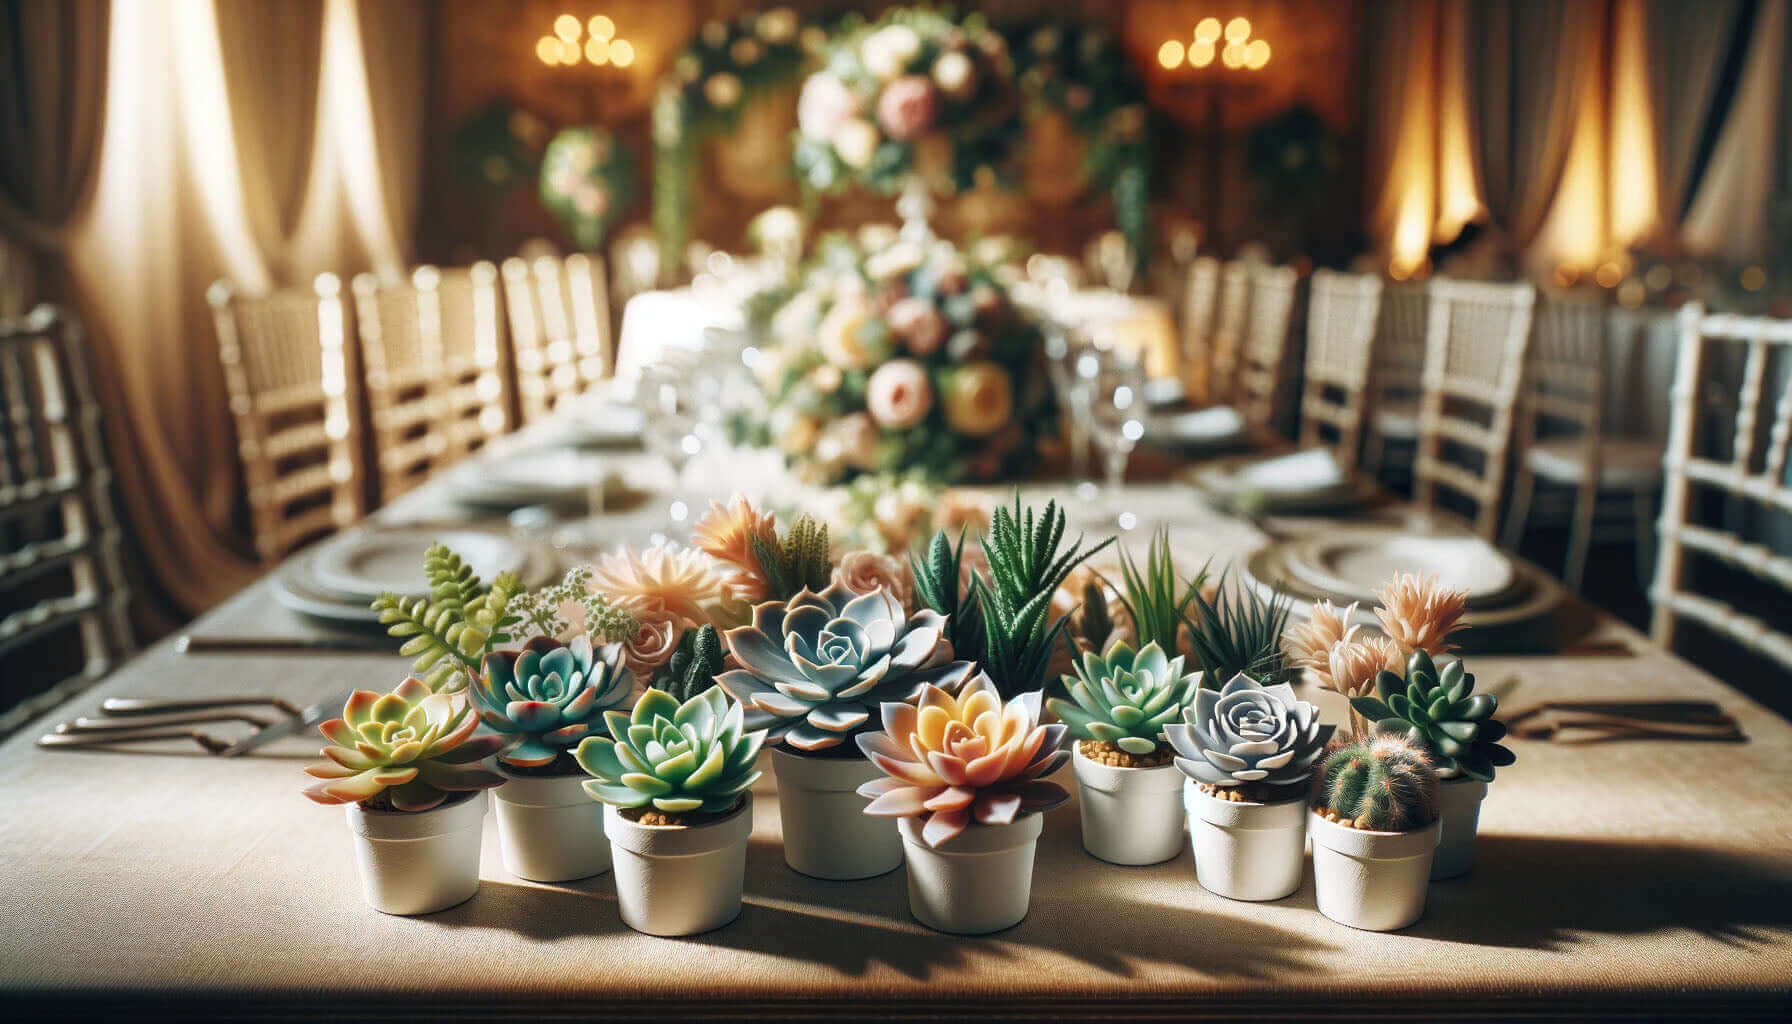 Assorted succulents in white pots on a wooden table at an elegant wedding reception, creating a sophisticated and natural atmosphere.